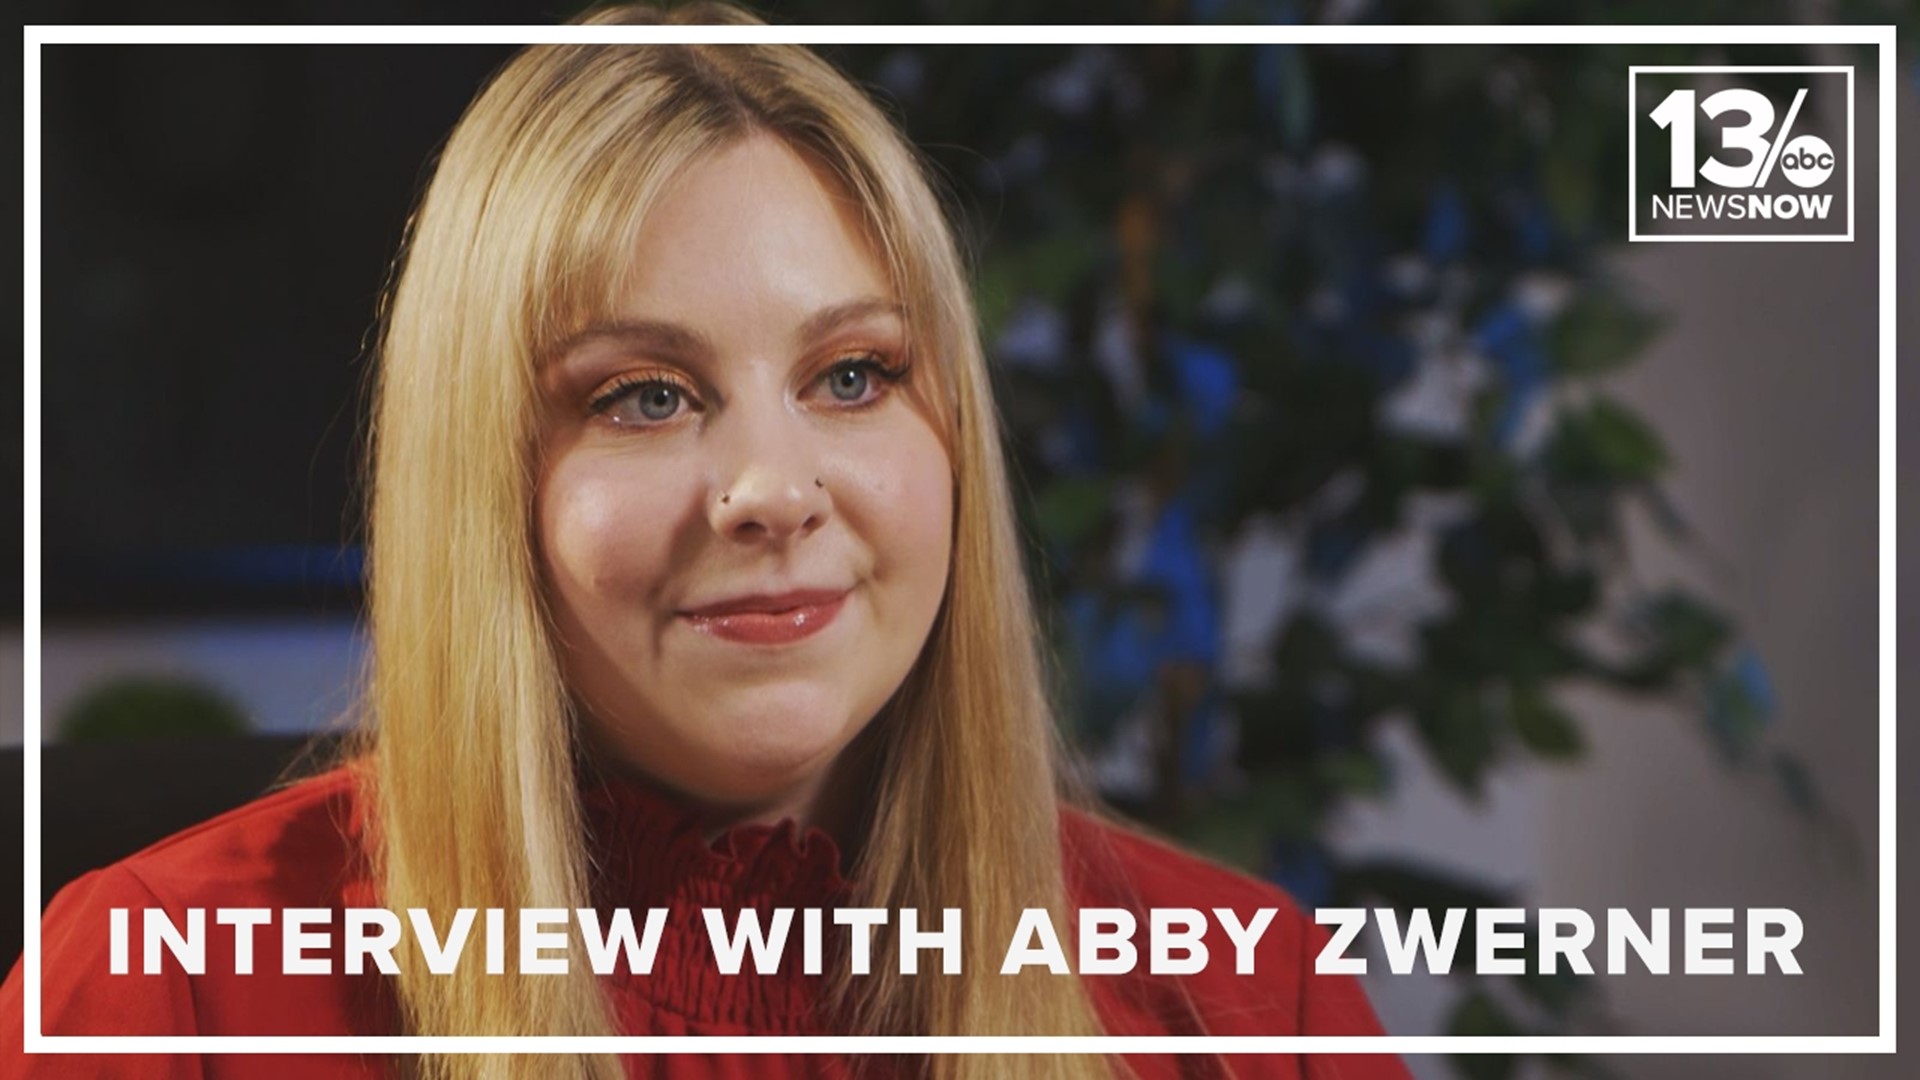 Abby Zwerner talks with 13News Now Anchor Janet Roach about her struggles and her hopes for the future, nearly one year after she was shot by her 6-year-old student.